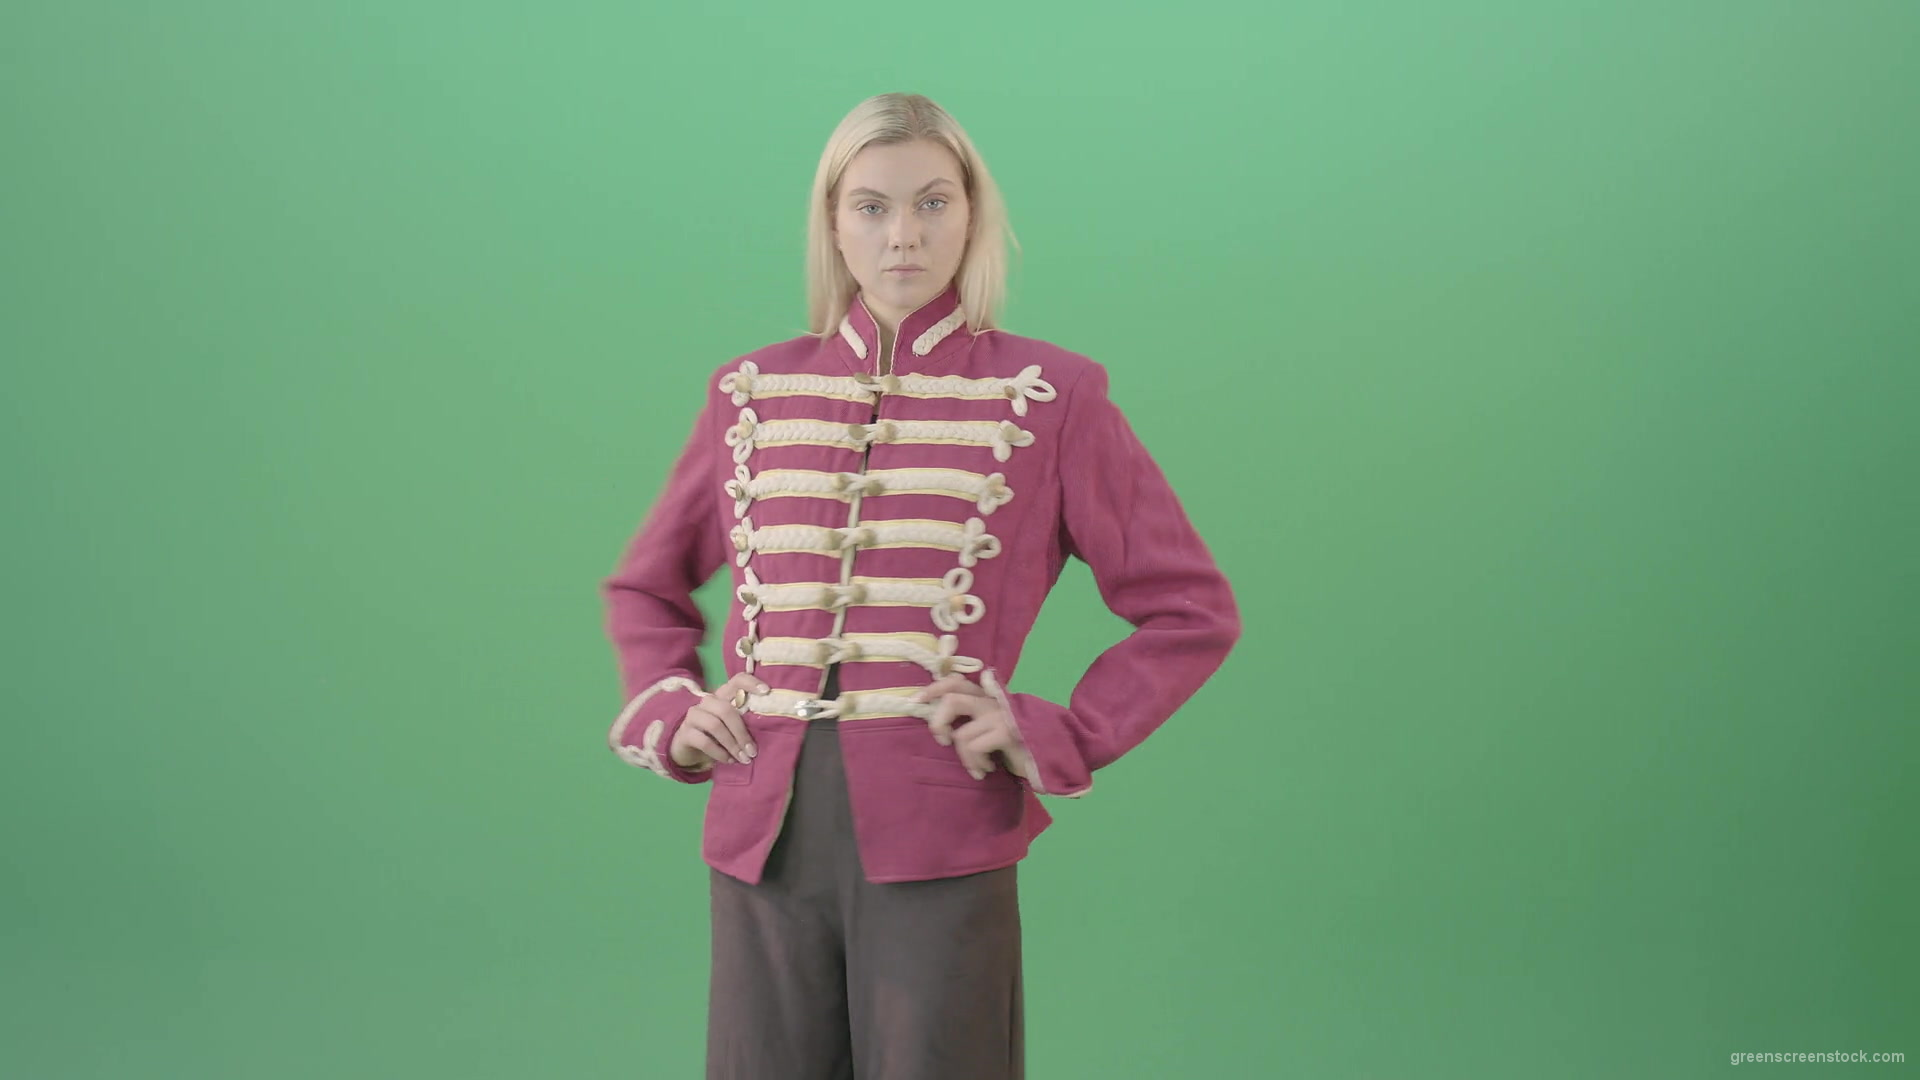 Blonde-Girl-in-Imperial-Royal-uniform-posing-and-shows-photomodel-gestures-isolated-on-Green-Screen-4K-Video-Footage-1920_002 Green Screen Stock